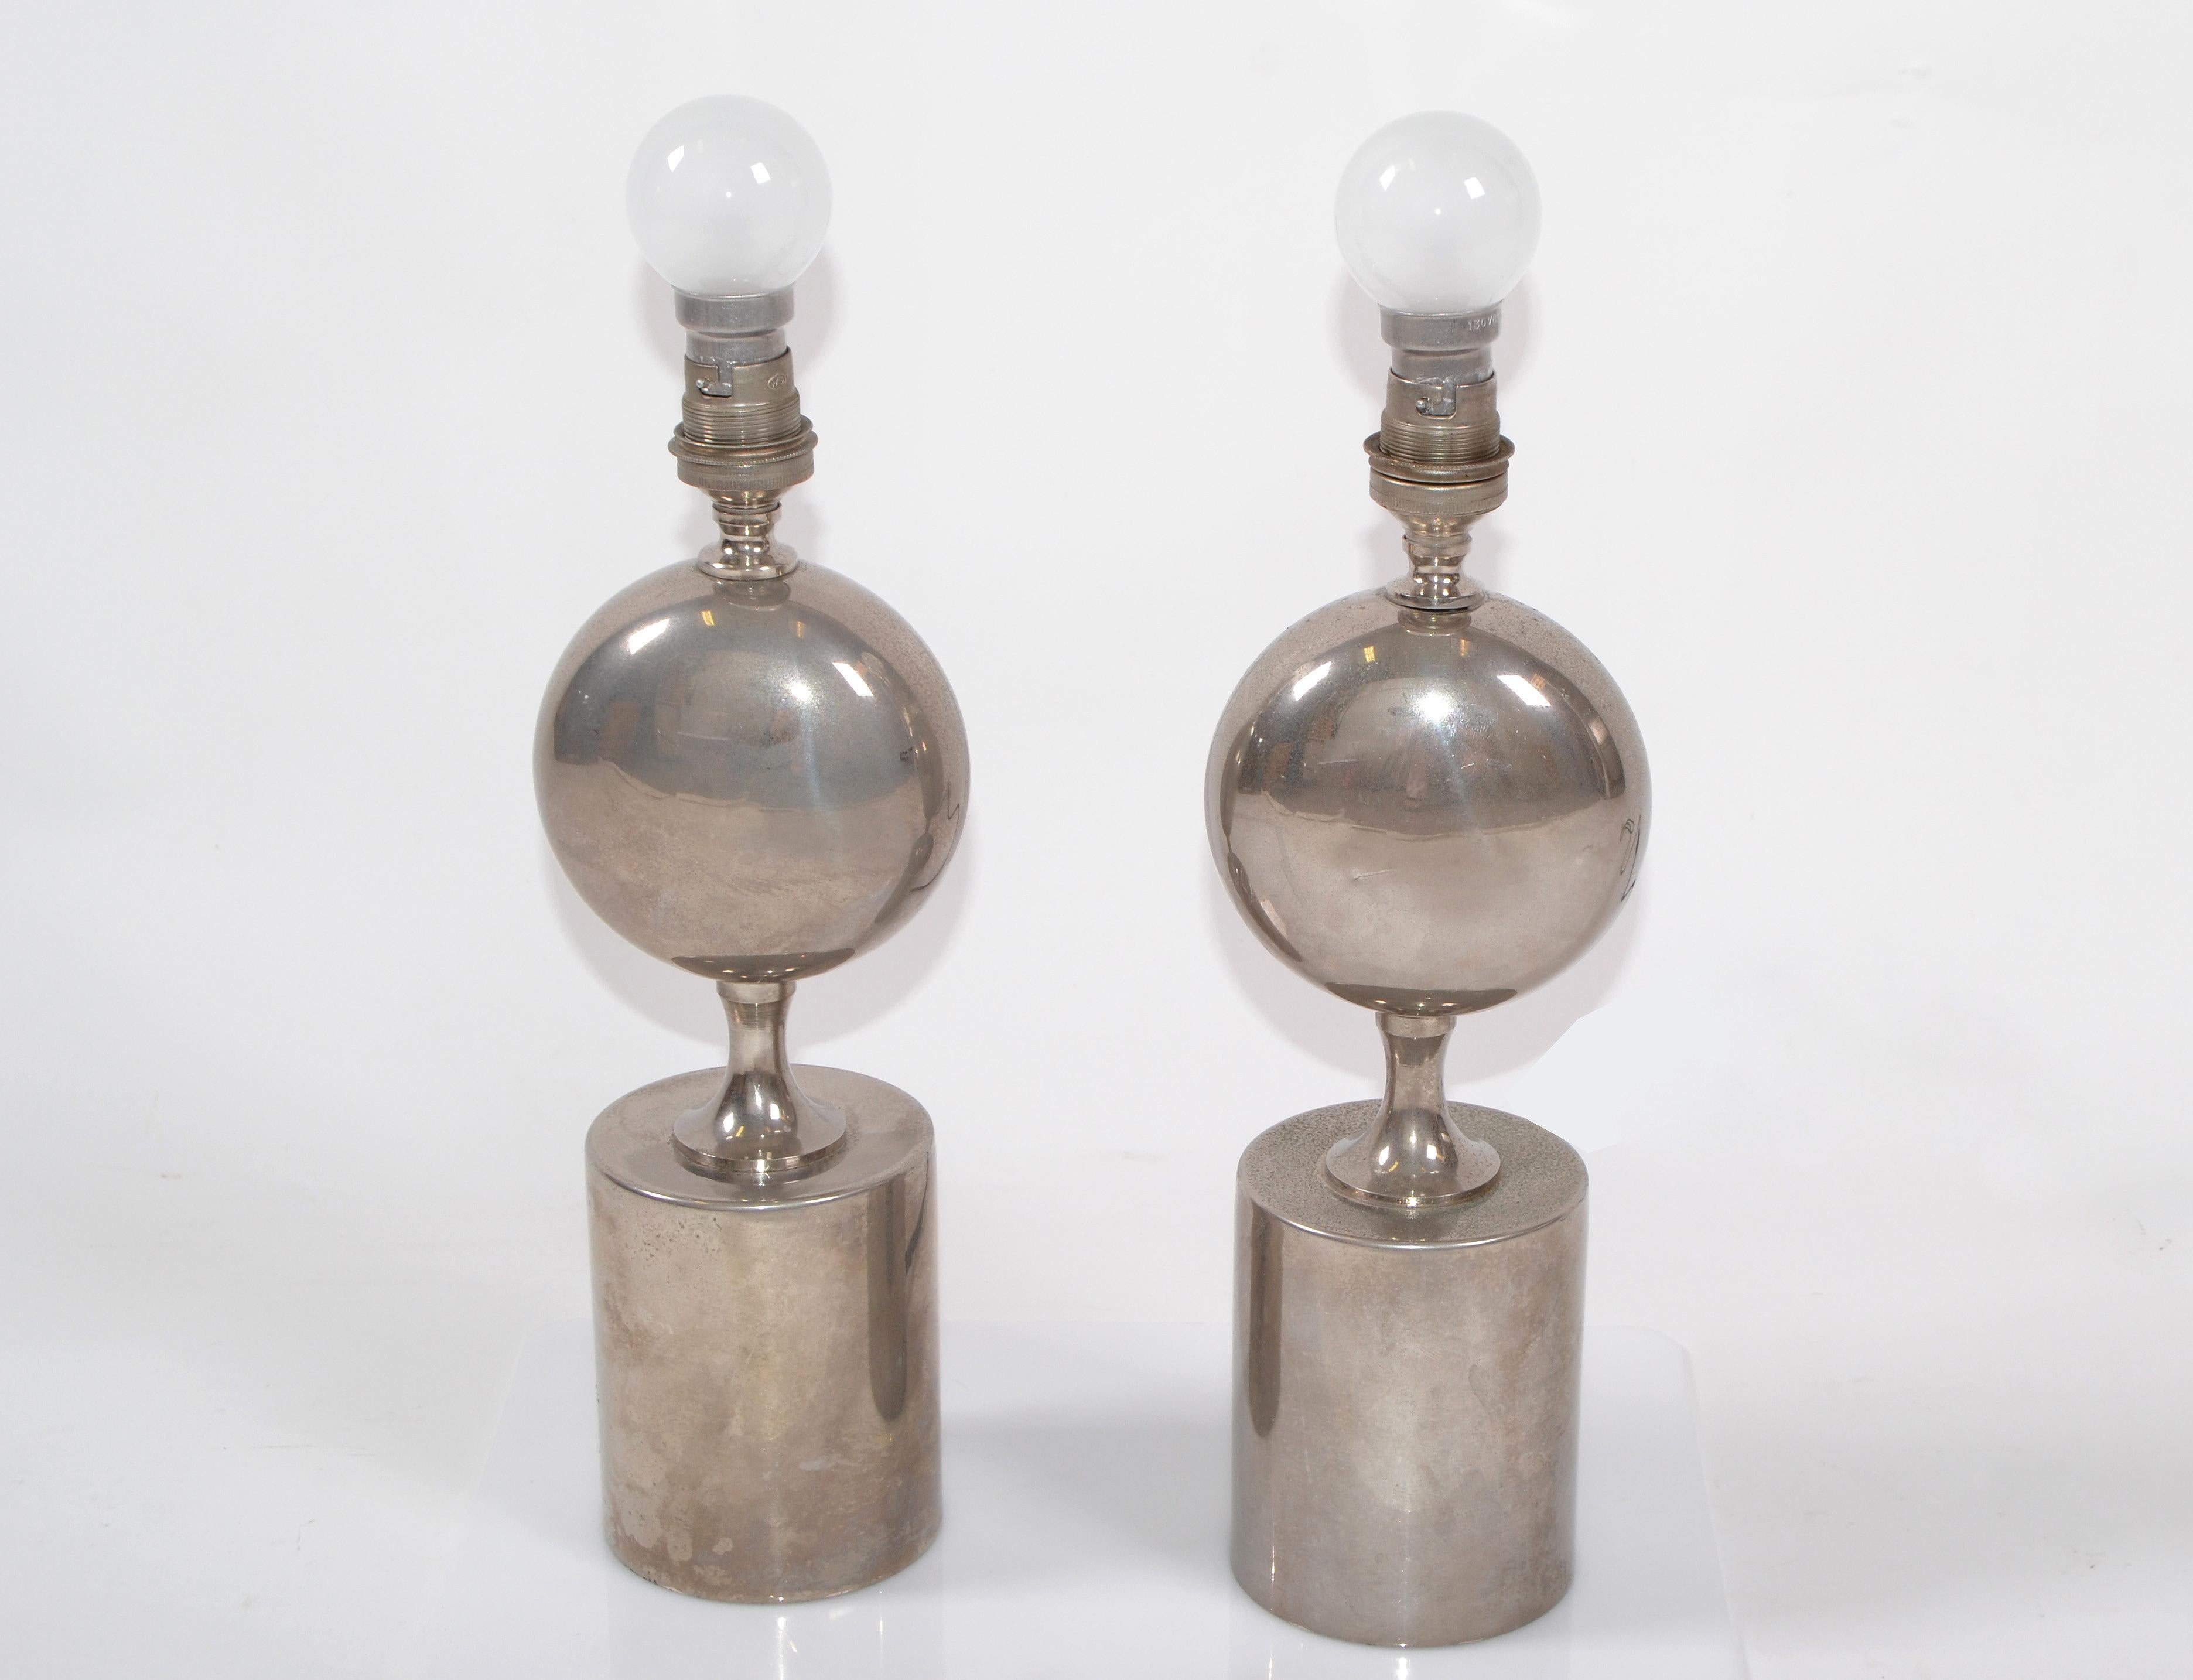 A pair of chrome over steel table lamps designed by Philippe Barbier and made by Maison Barbier in France.
Working condition and each takes one bulb with 40 watts max.
    